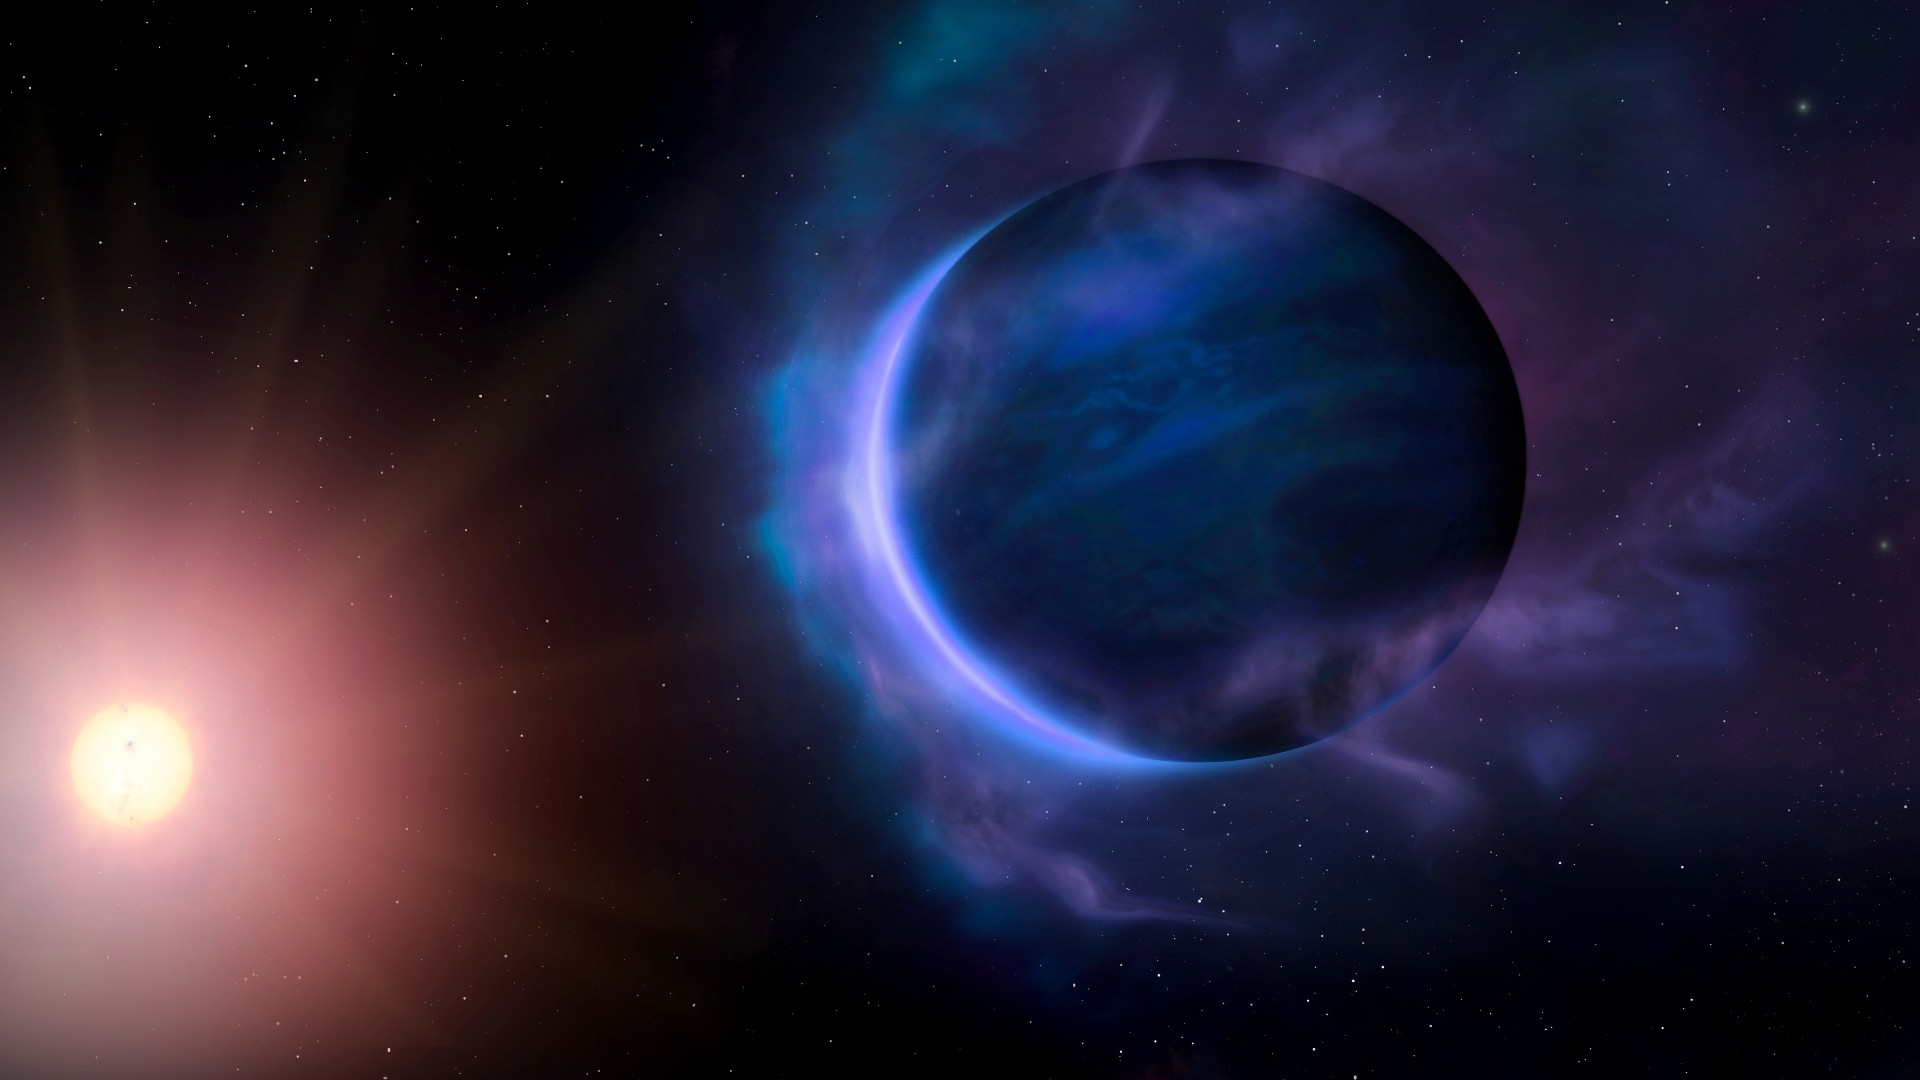 Puffy helium planets could explain exoplanet size mystery